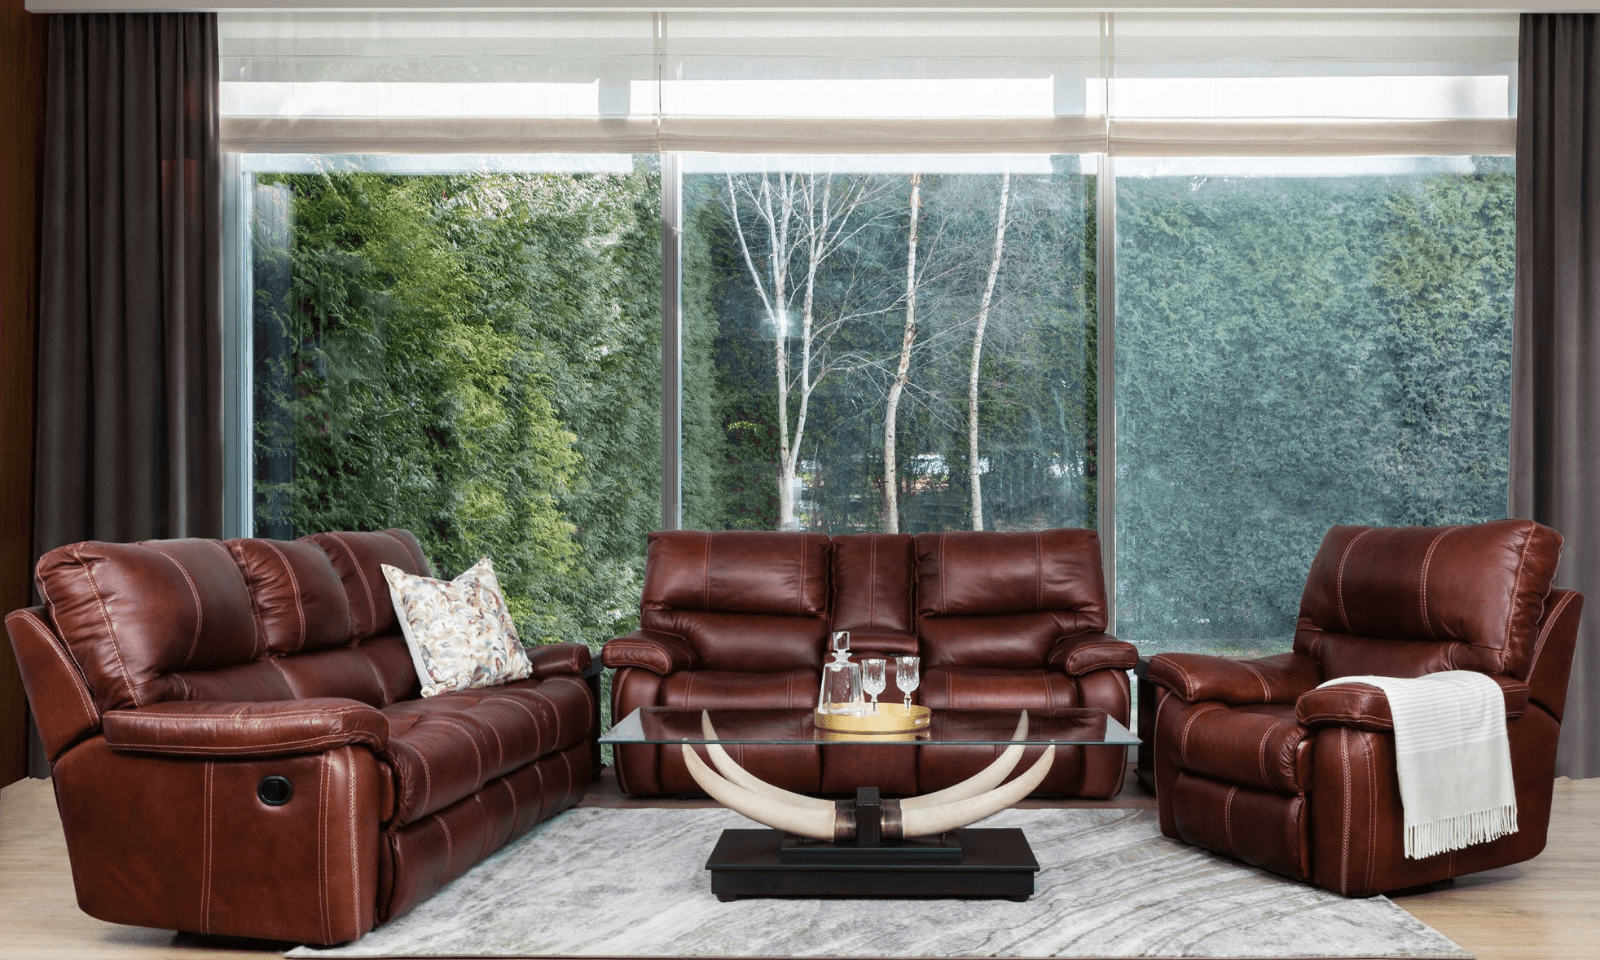 HOW TO STYLE LEATHER RECLINERS IN YOUR HOME